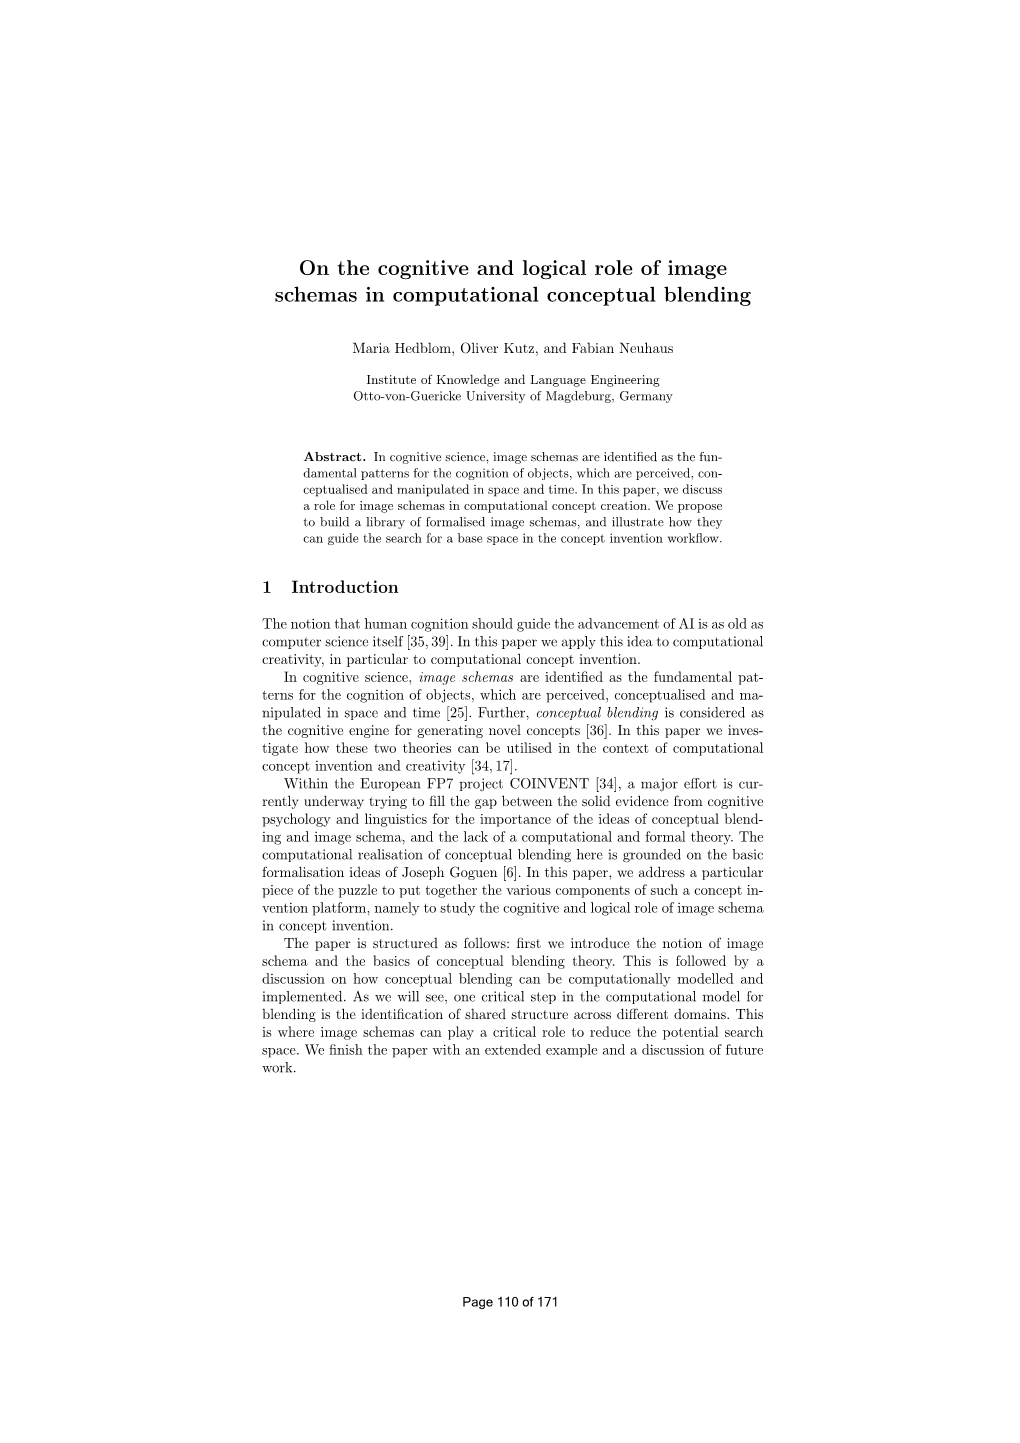 On the Cognitive and Logical Role of Image Schemas in Computational Conceptual Blending